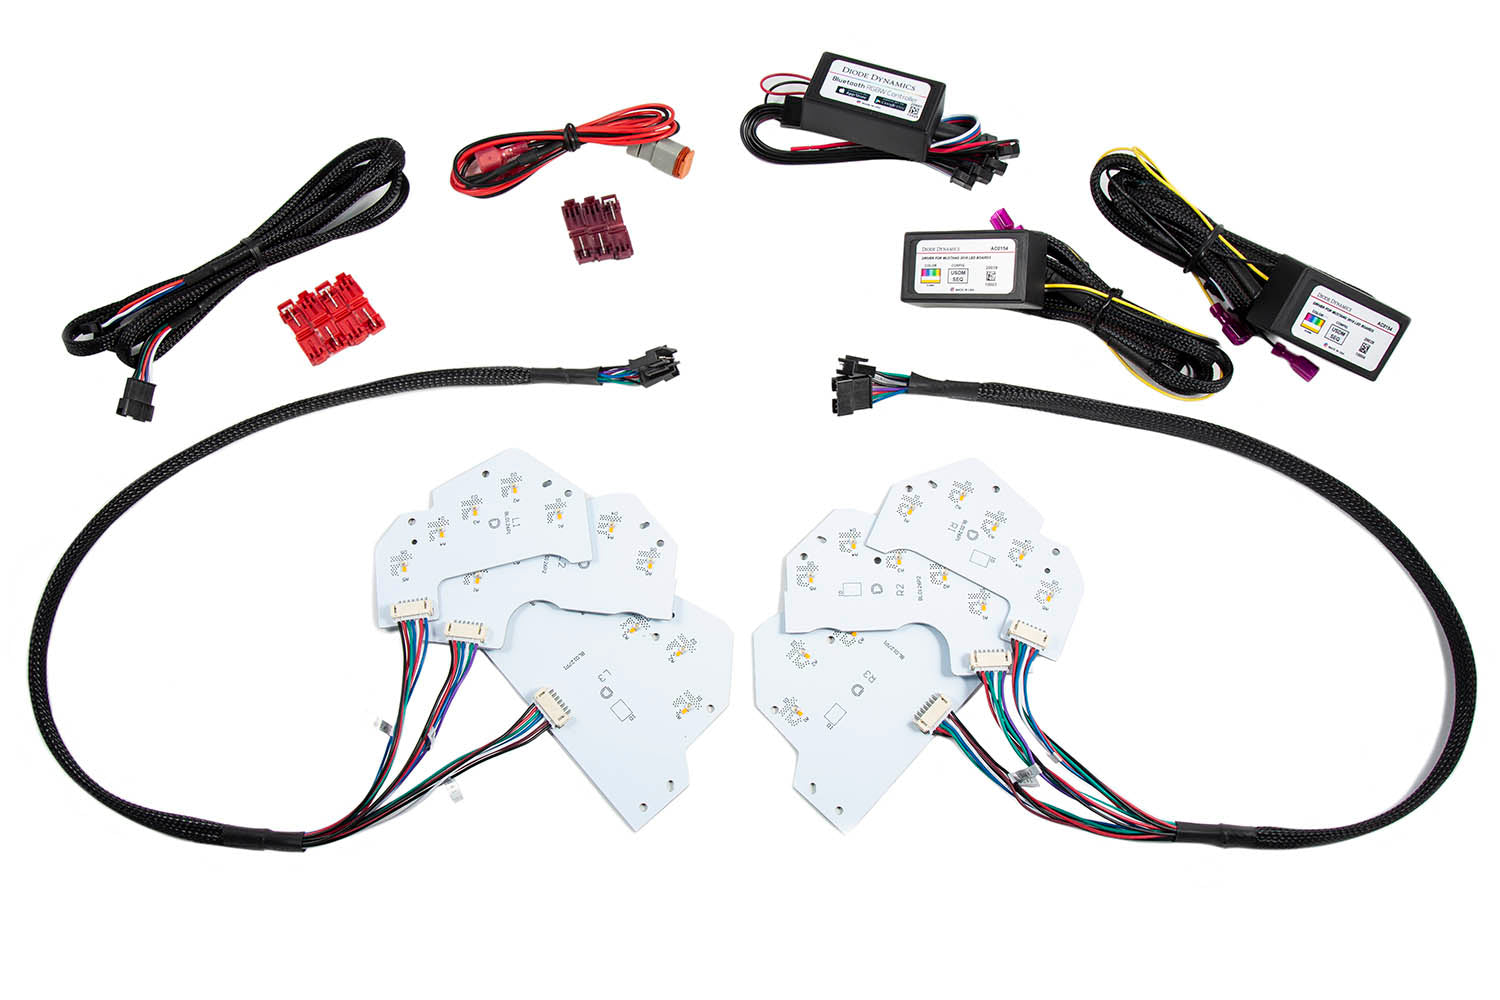 RGBW DRL LED Boards for 2018-2021 Ford Mustang